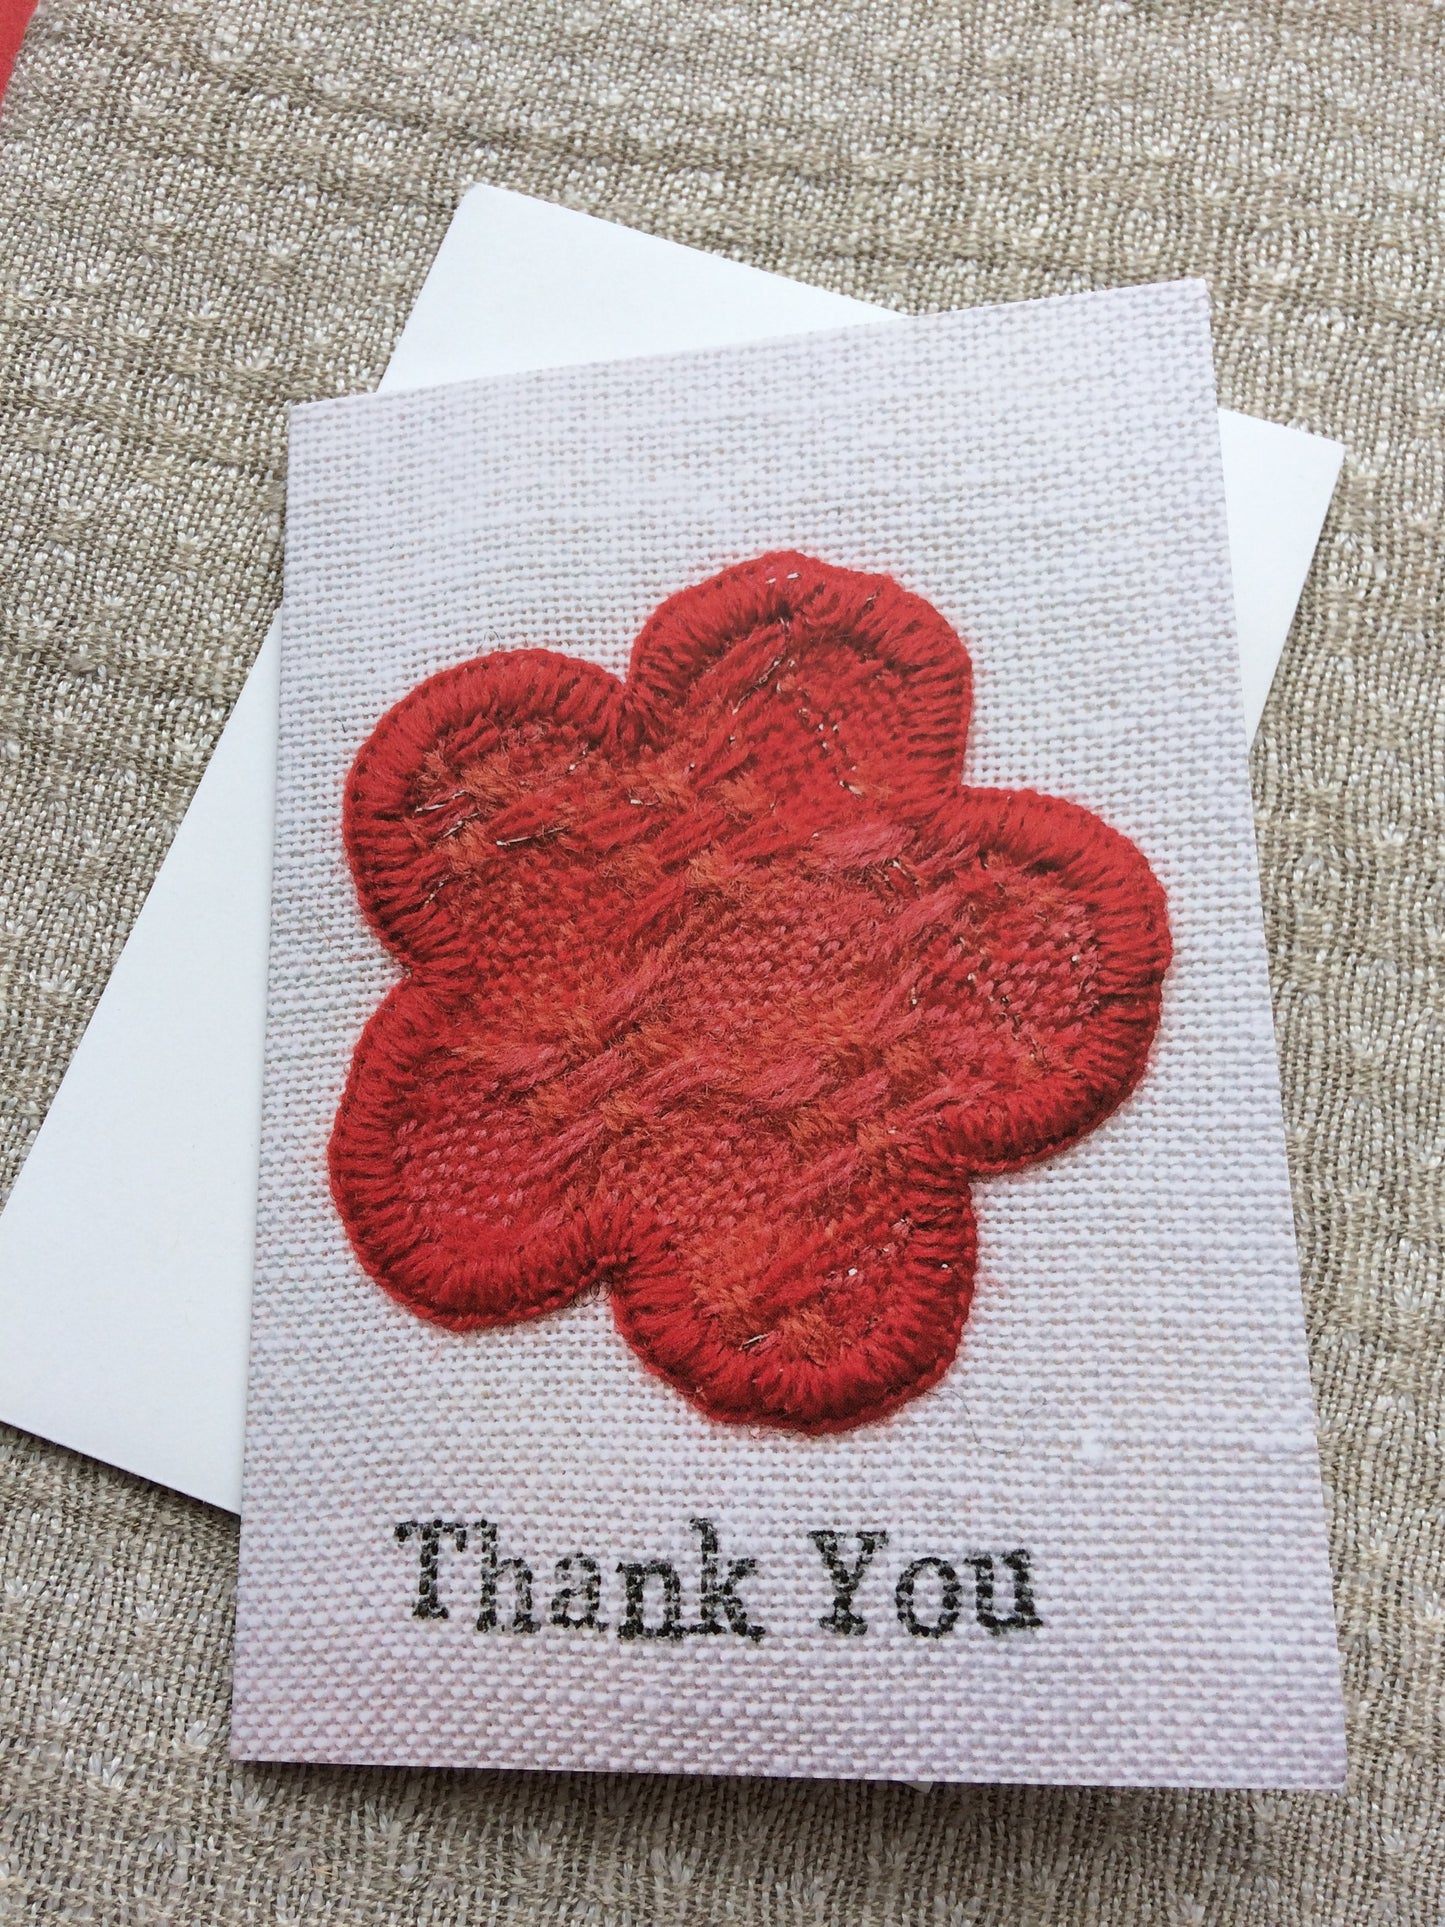 'Thank You' Greetings Cards